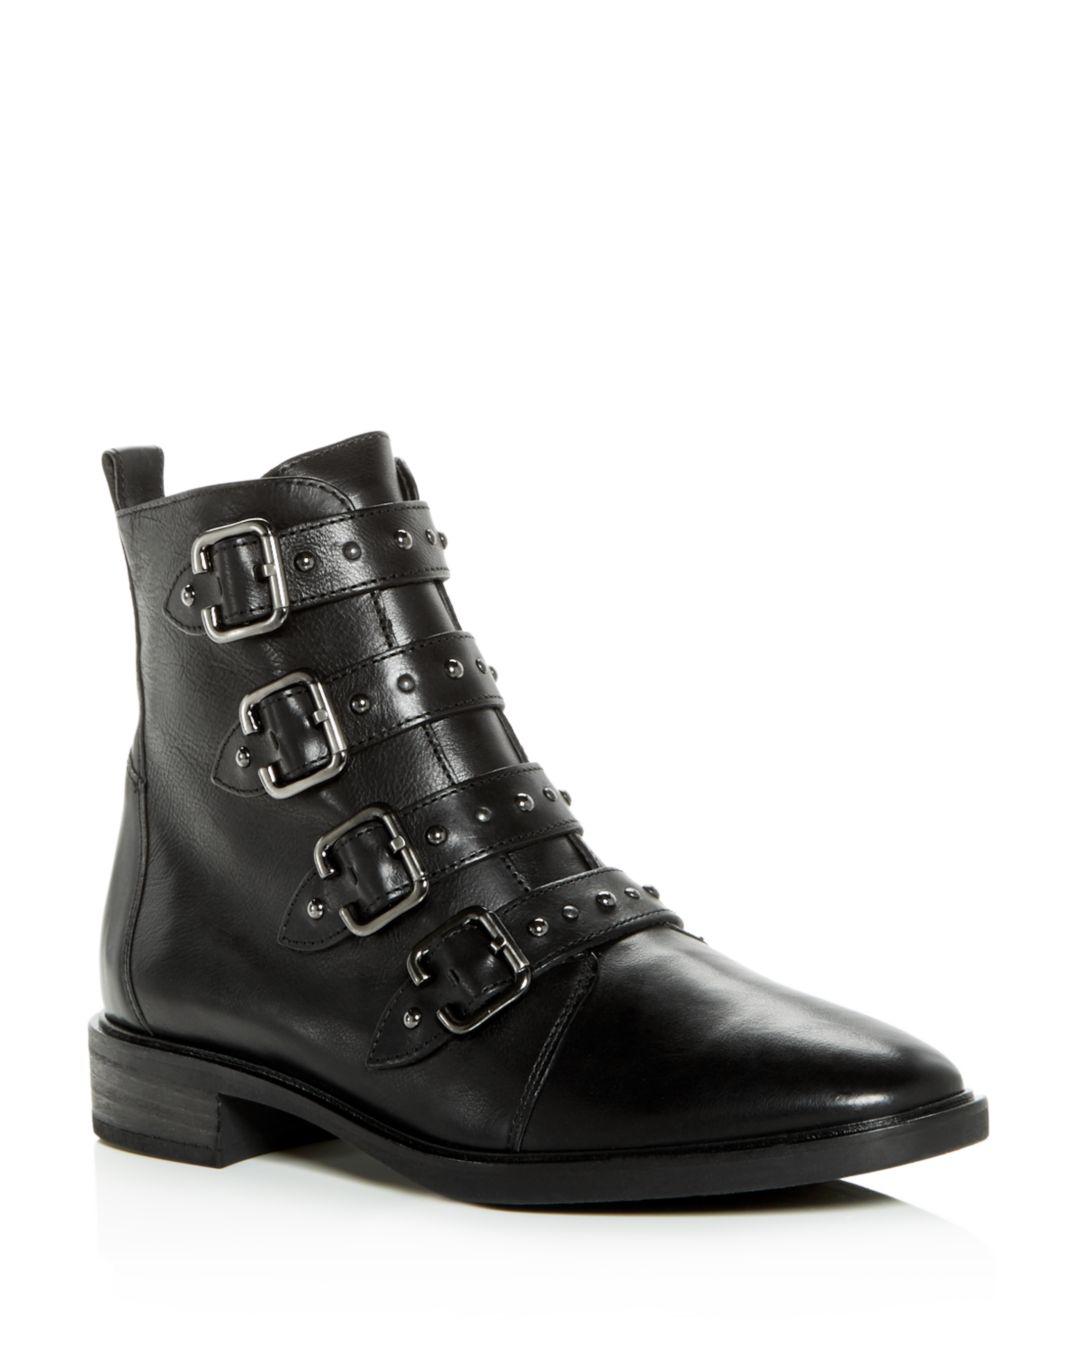 Vega Studded Strap Leather Booties 